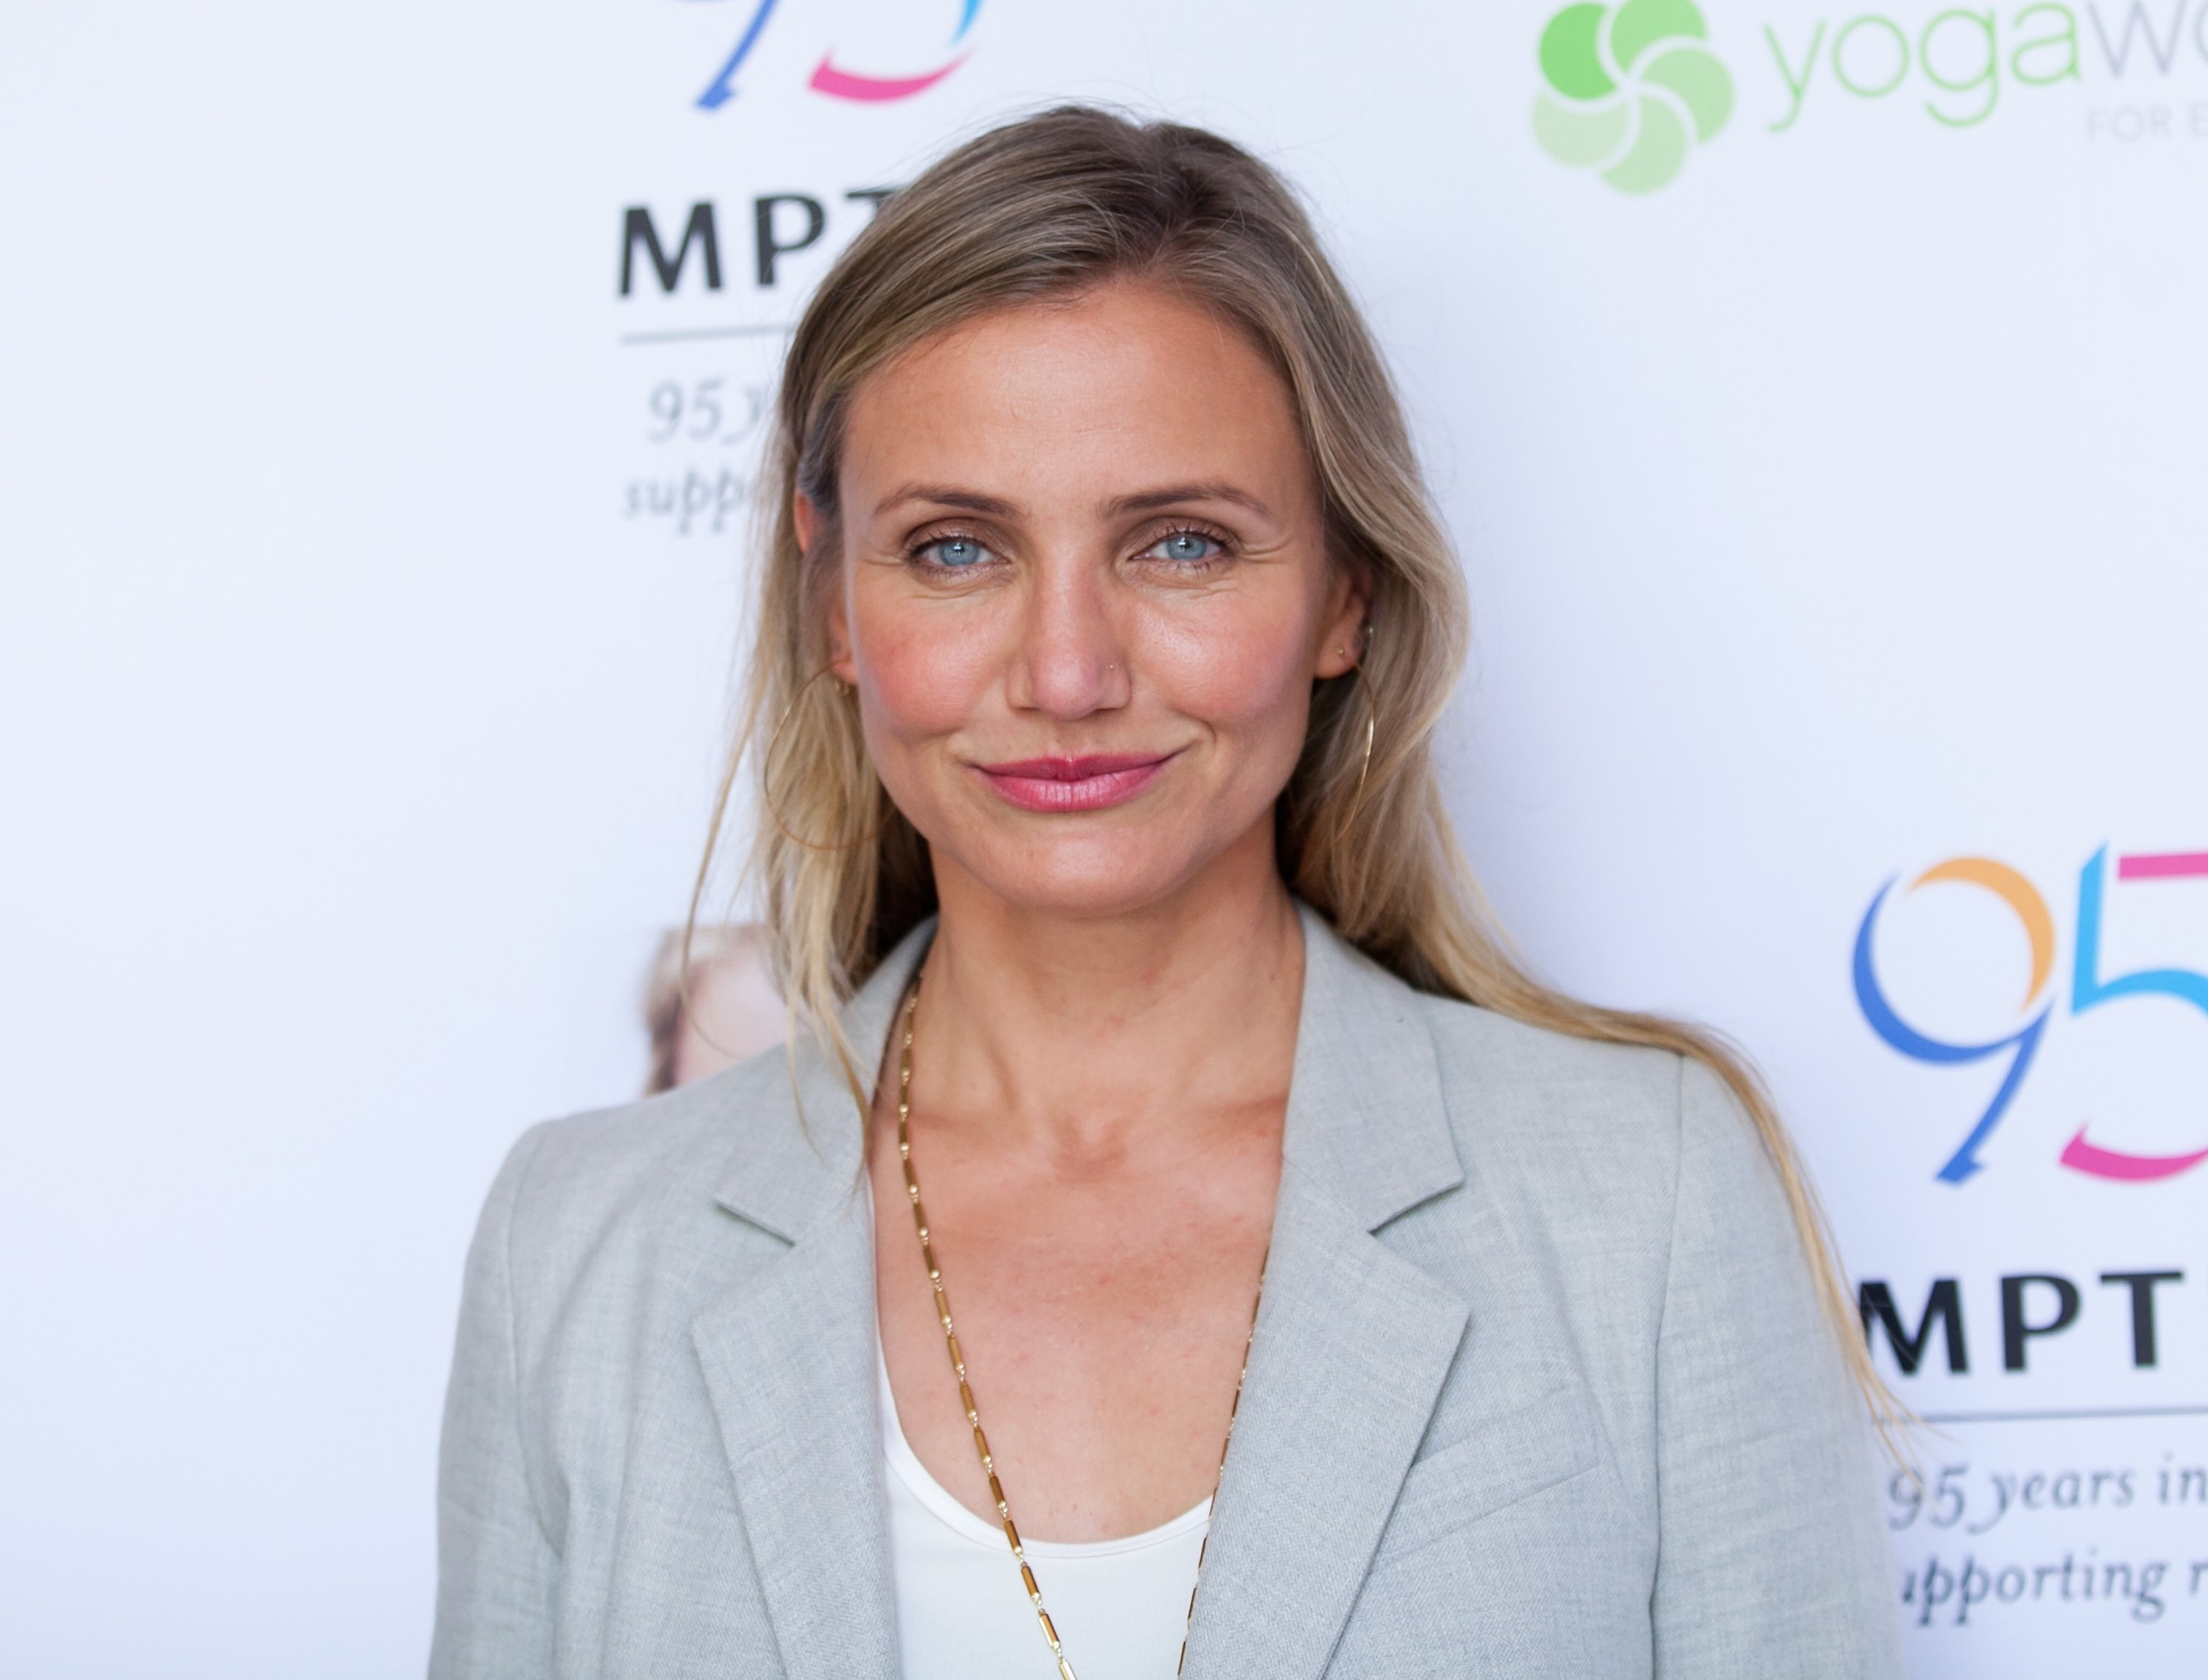 Source: Getty Images / Cameron Diaz attends the MPTF Celebration for health and fitness at The Wasserman Campus on June 10, 2016 in Woodland Hills, California